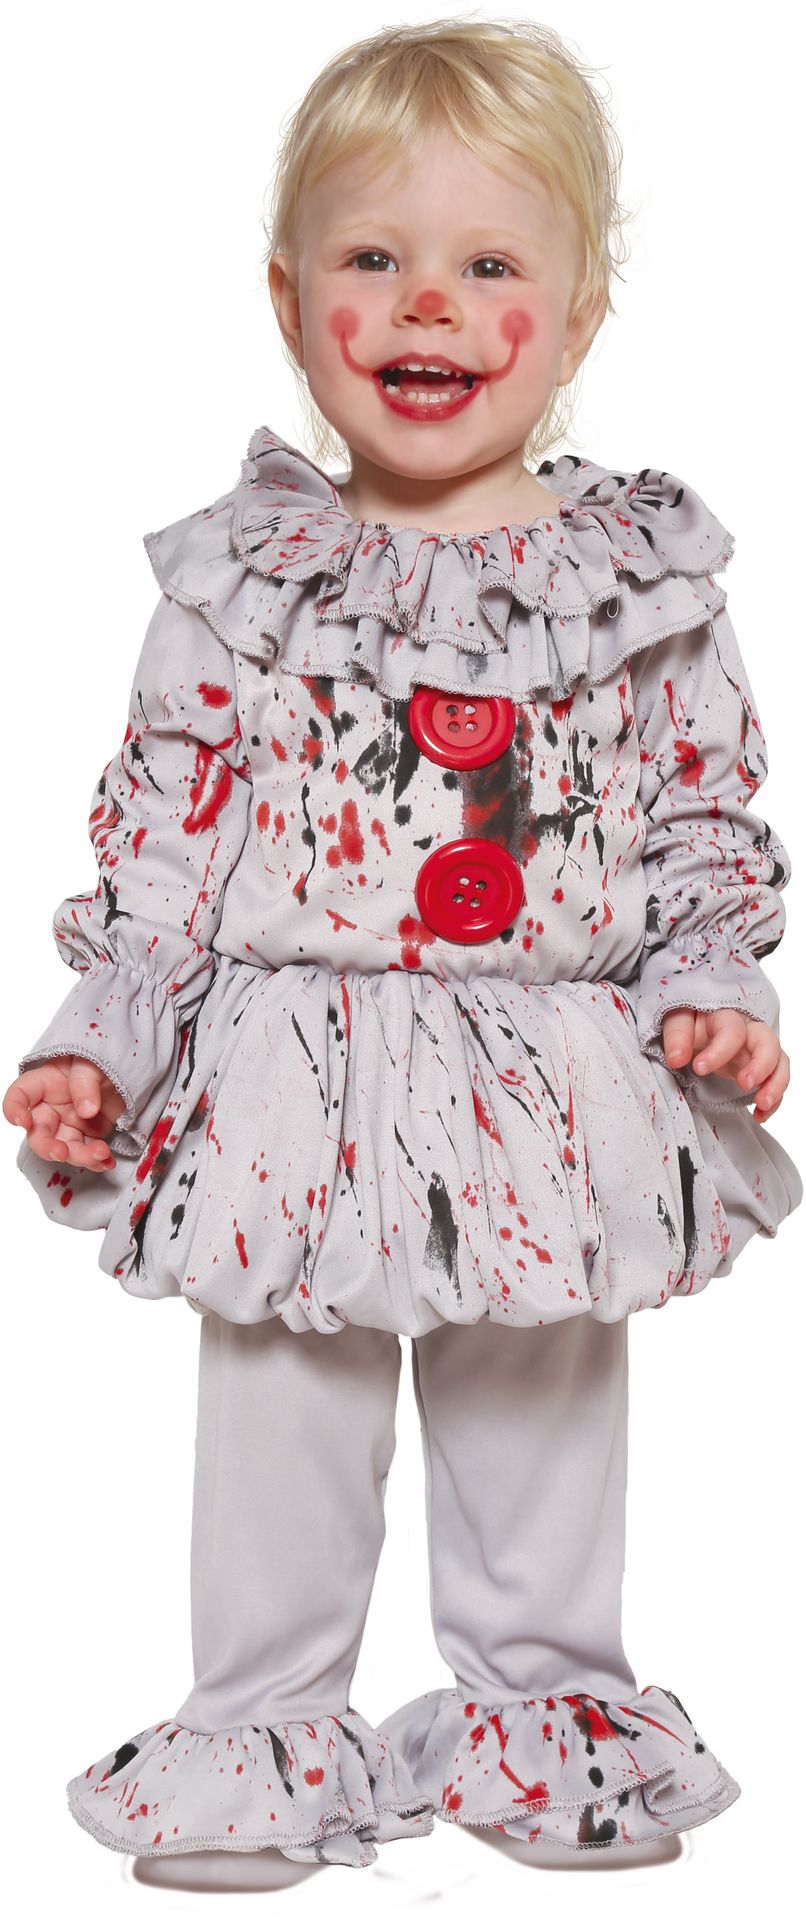 Baby iT clown Pennywise outfit baby